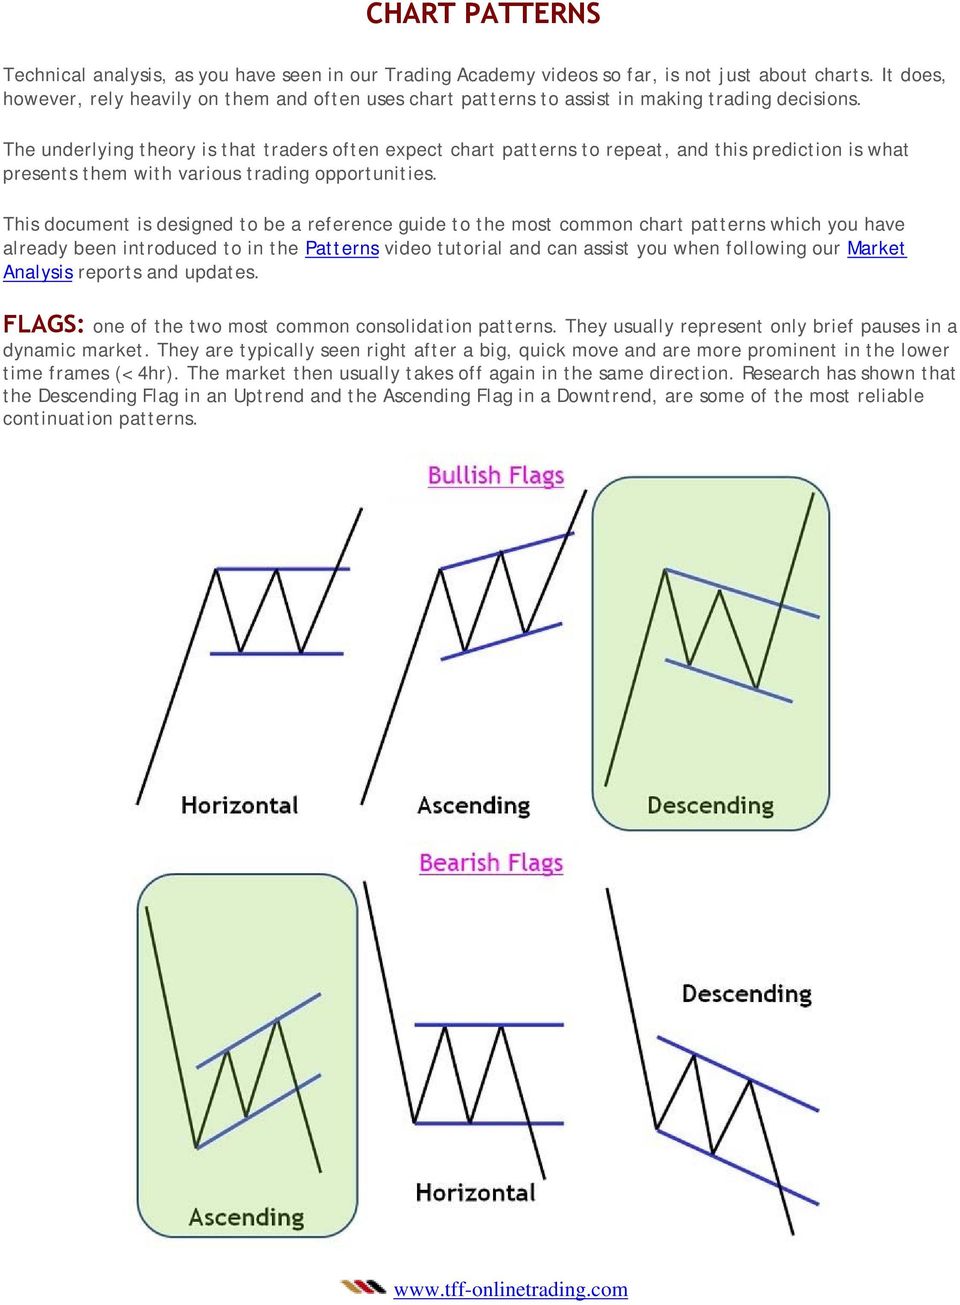 The underlying theory is that traders often expect chart patterns to repeat, and this prediction is what presents them with various trading opportunities.